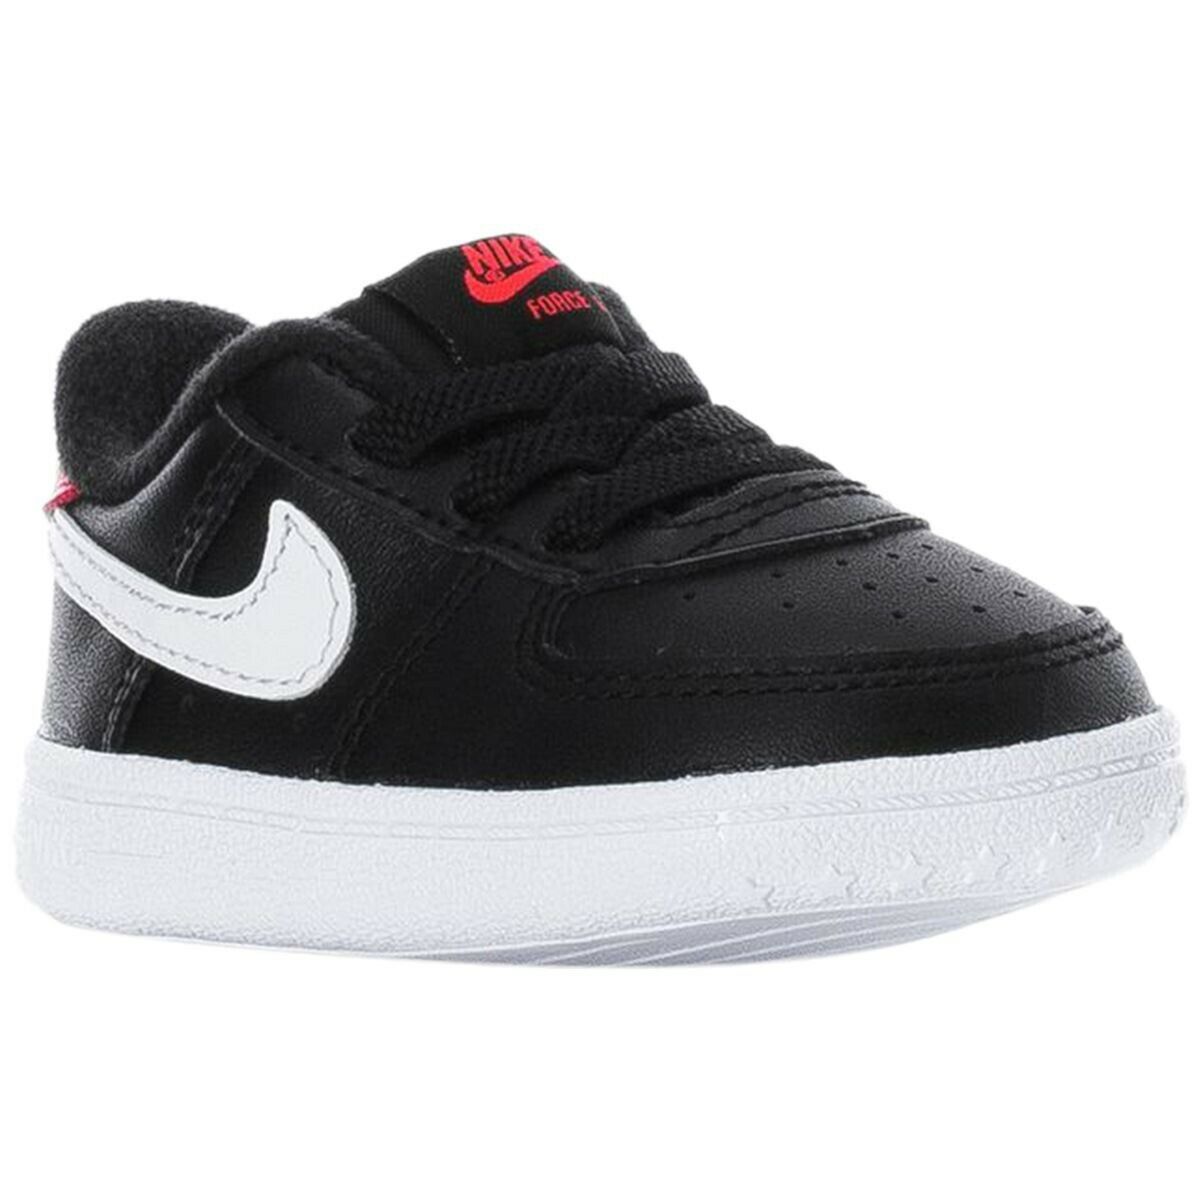 Nike Force 1 Crib Infant Shoes Black CK2201 003 Baby Size 2c Brand New With Box